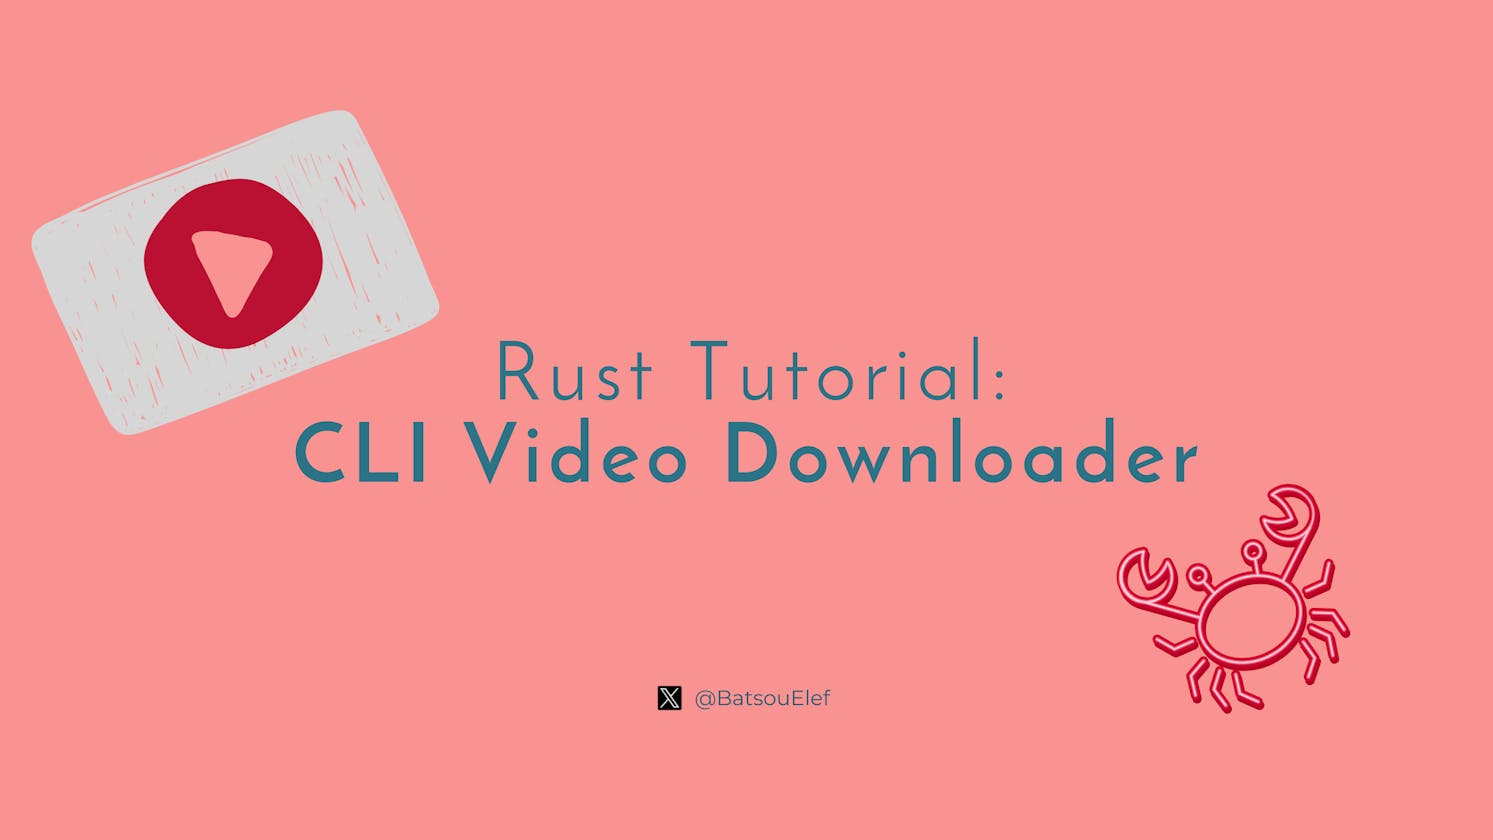 CLI Video Downloader in Rust: A Step-by-Step Tutorial